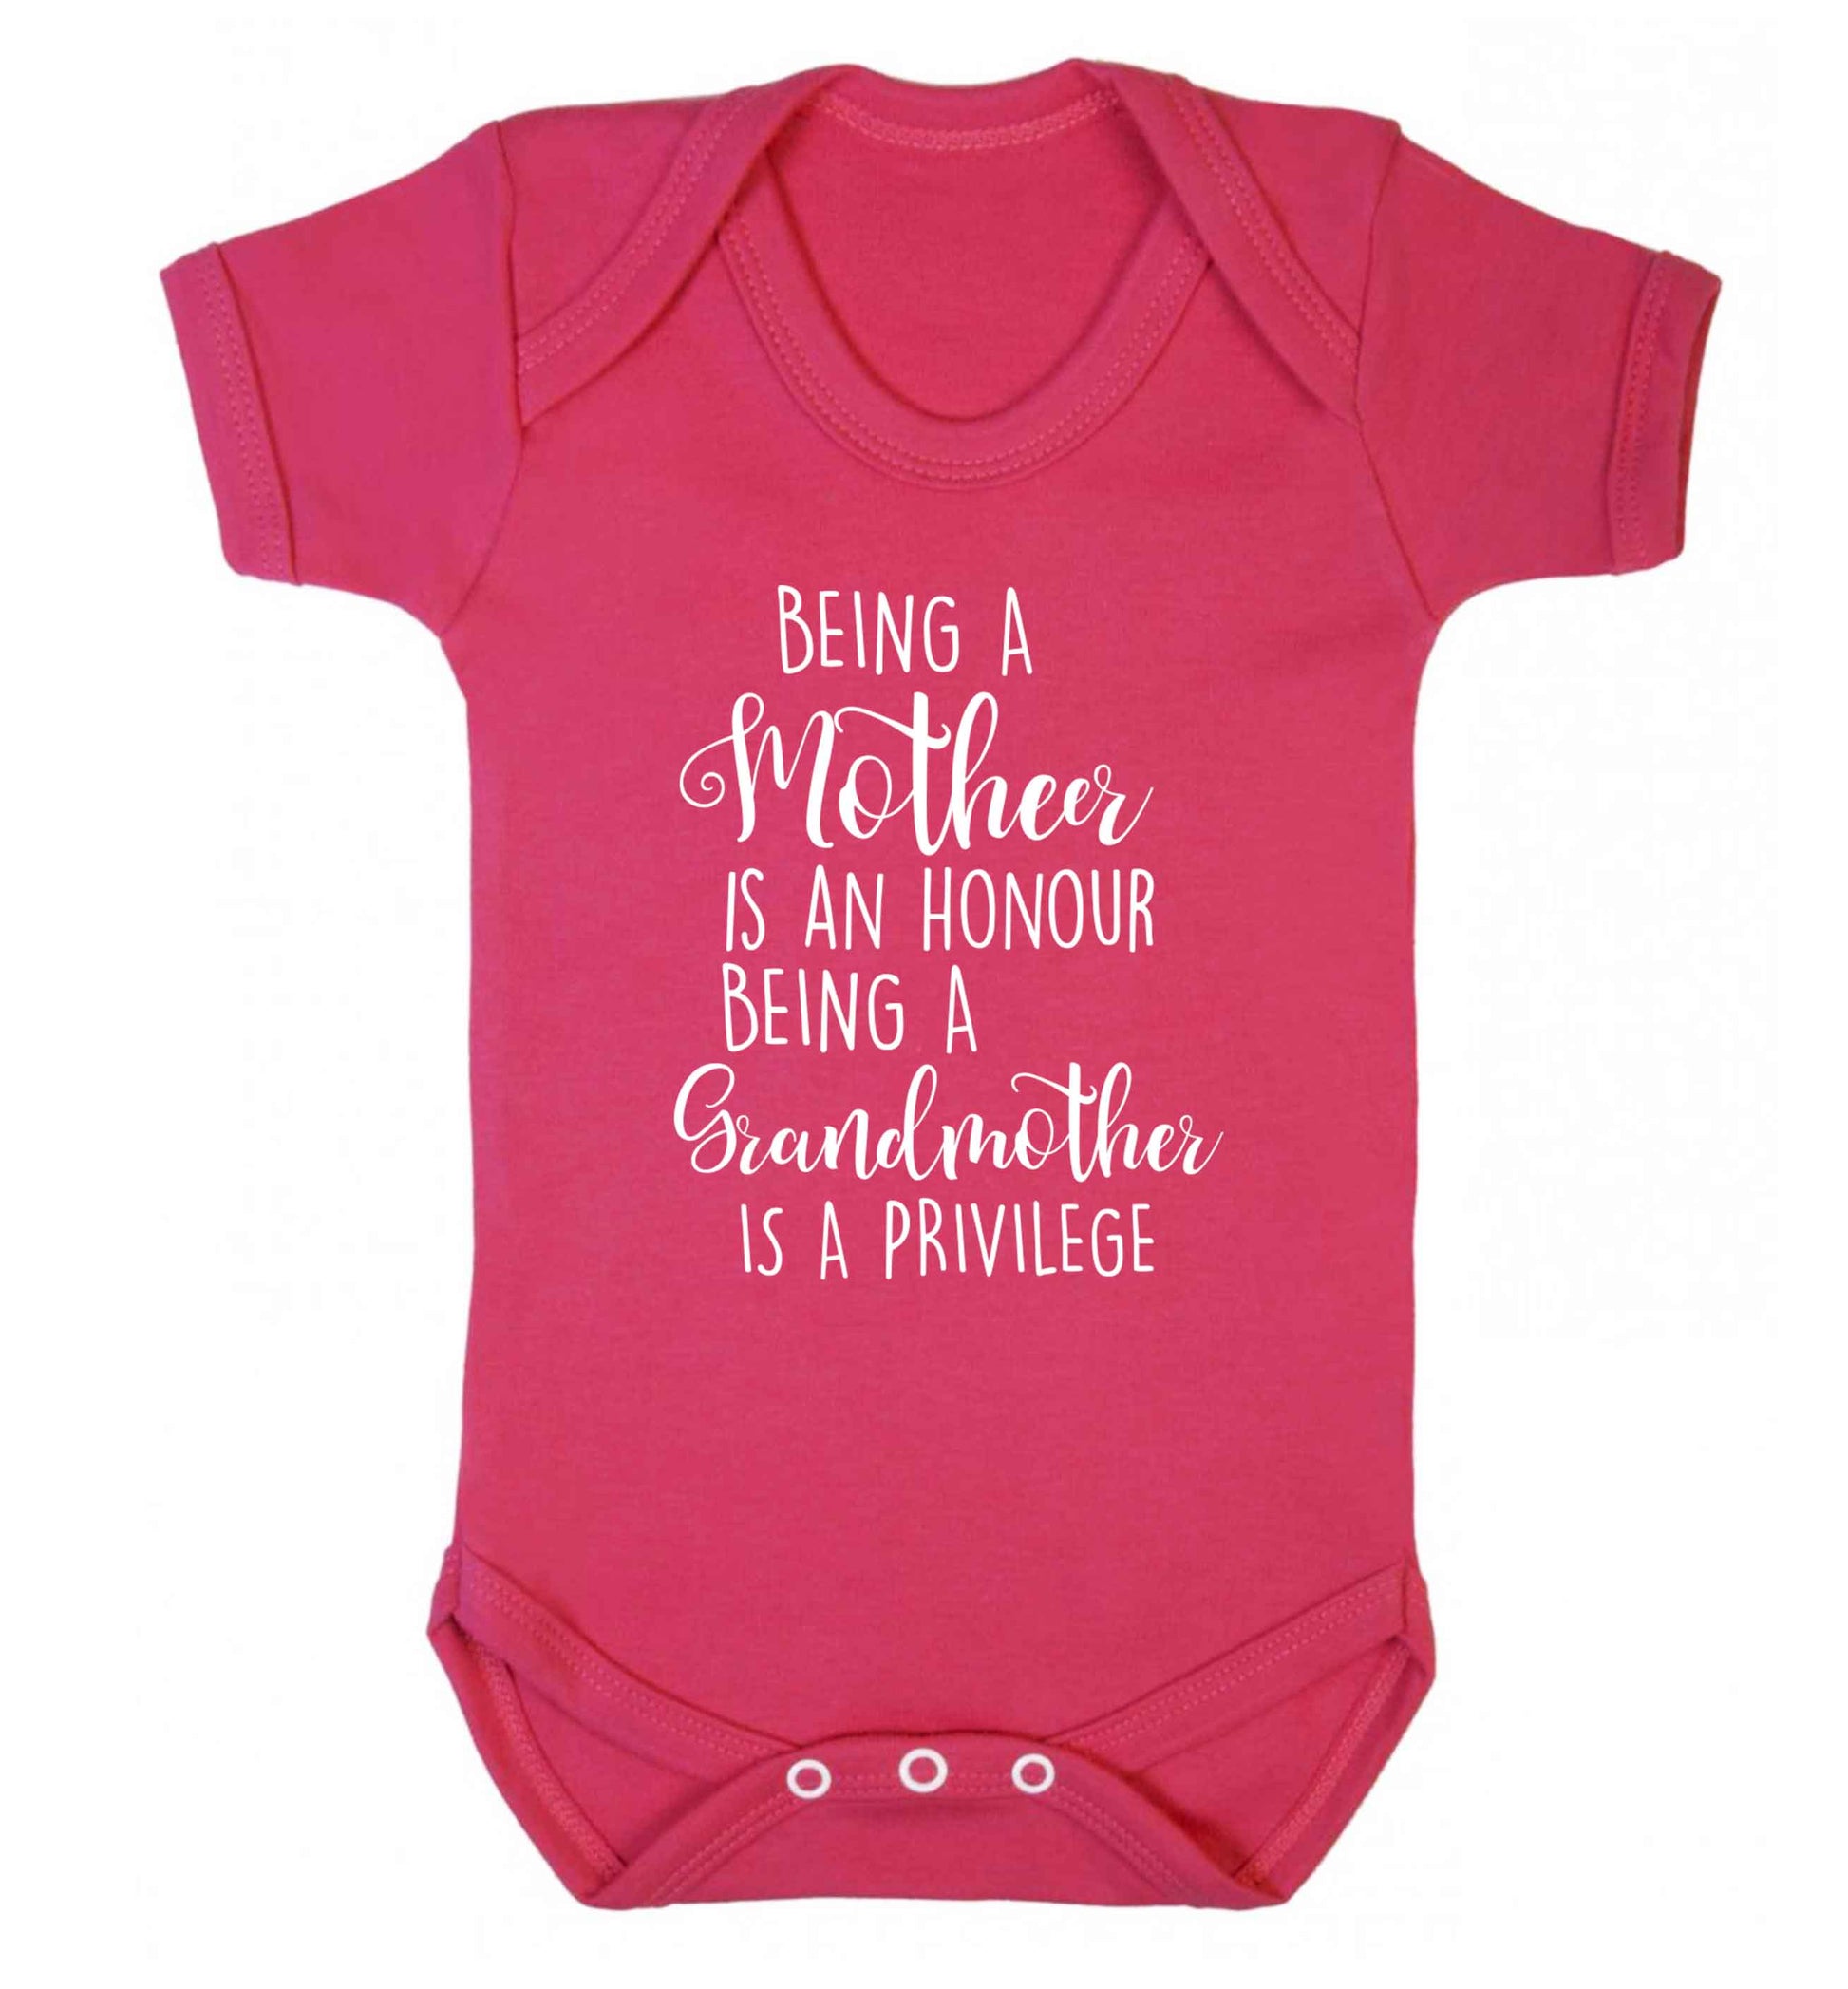 Being a mother is an honour being an grandmother is a privilege Baby Vest dark pink 18-24 months